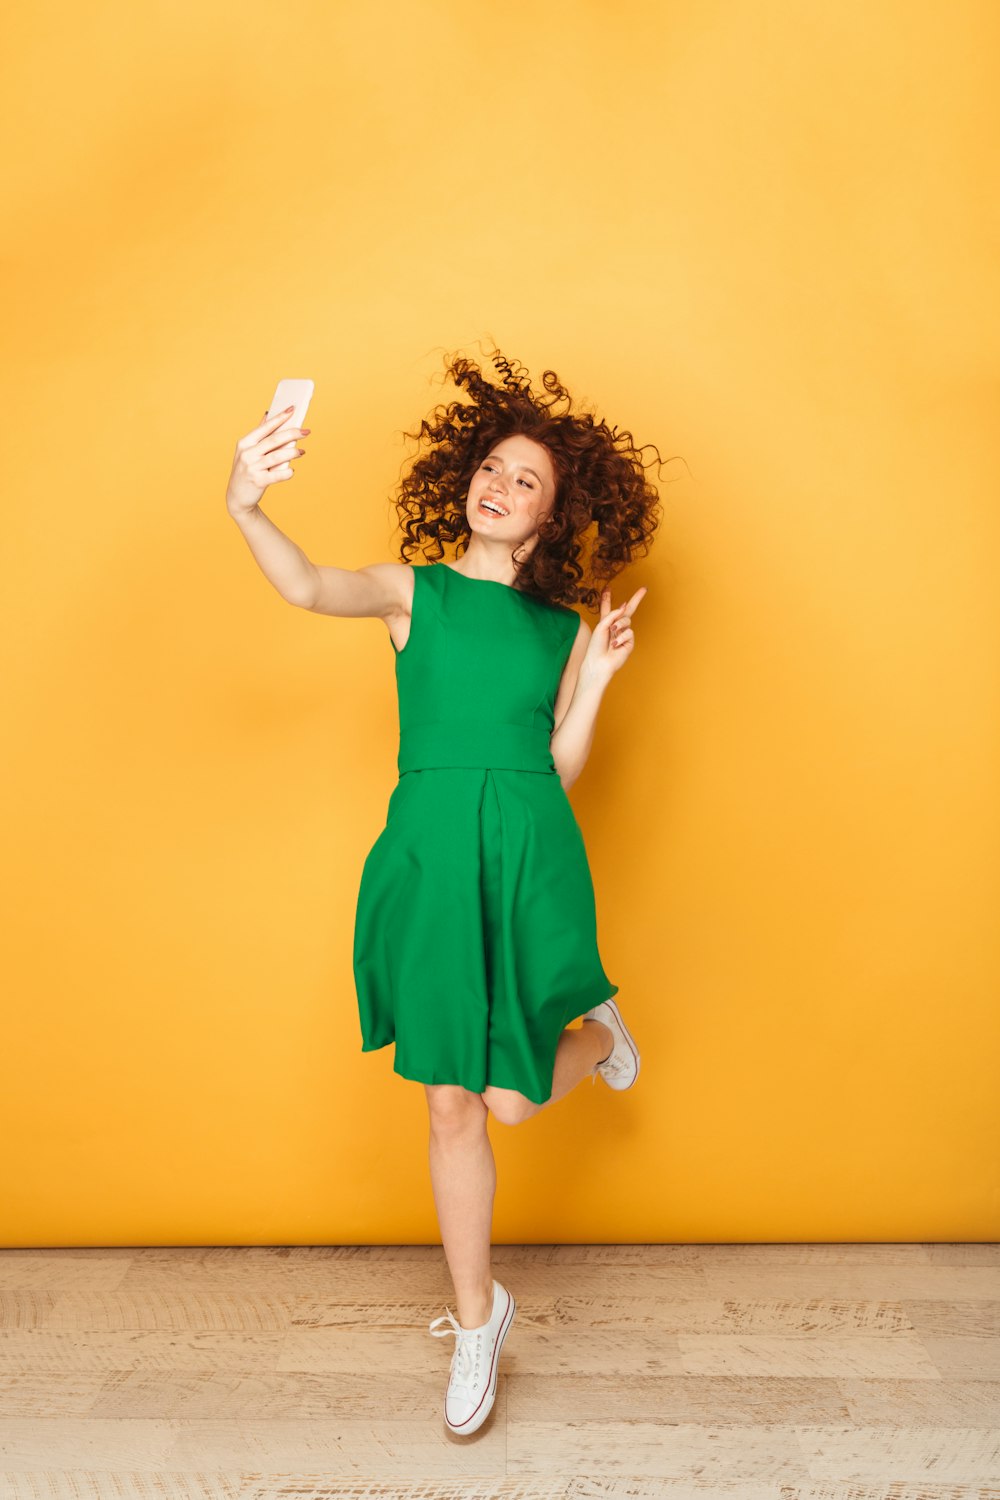 a woman in a green dress is jumping in the air